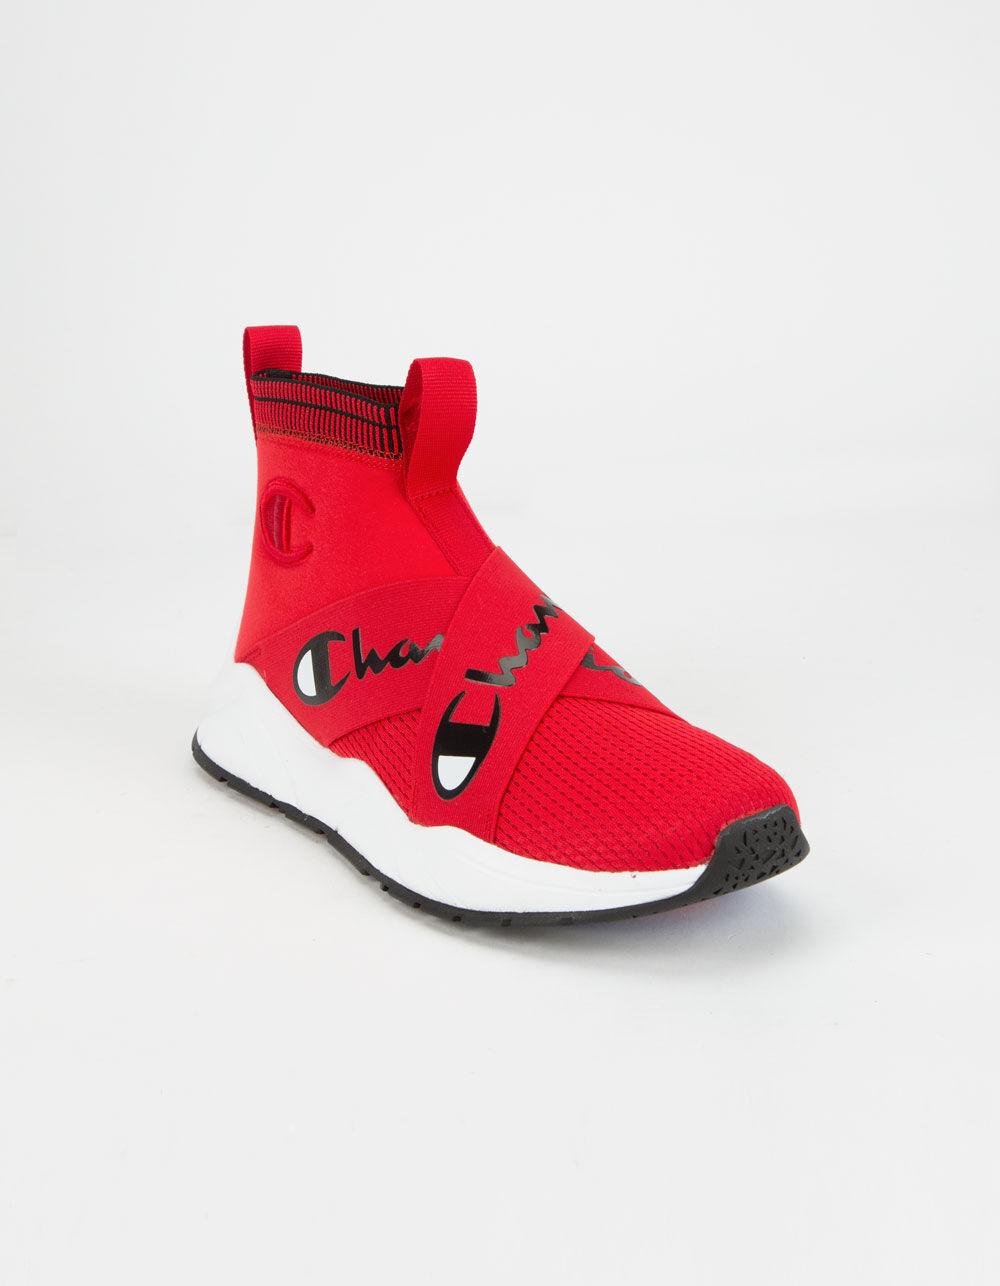 black and red champion shoes